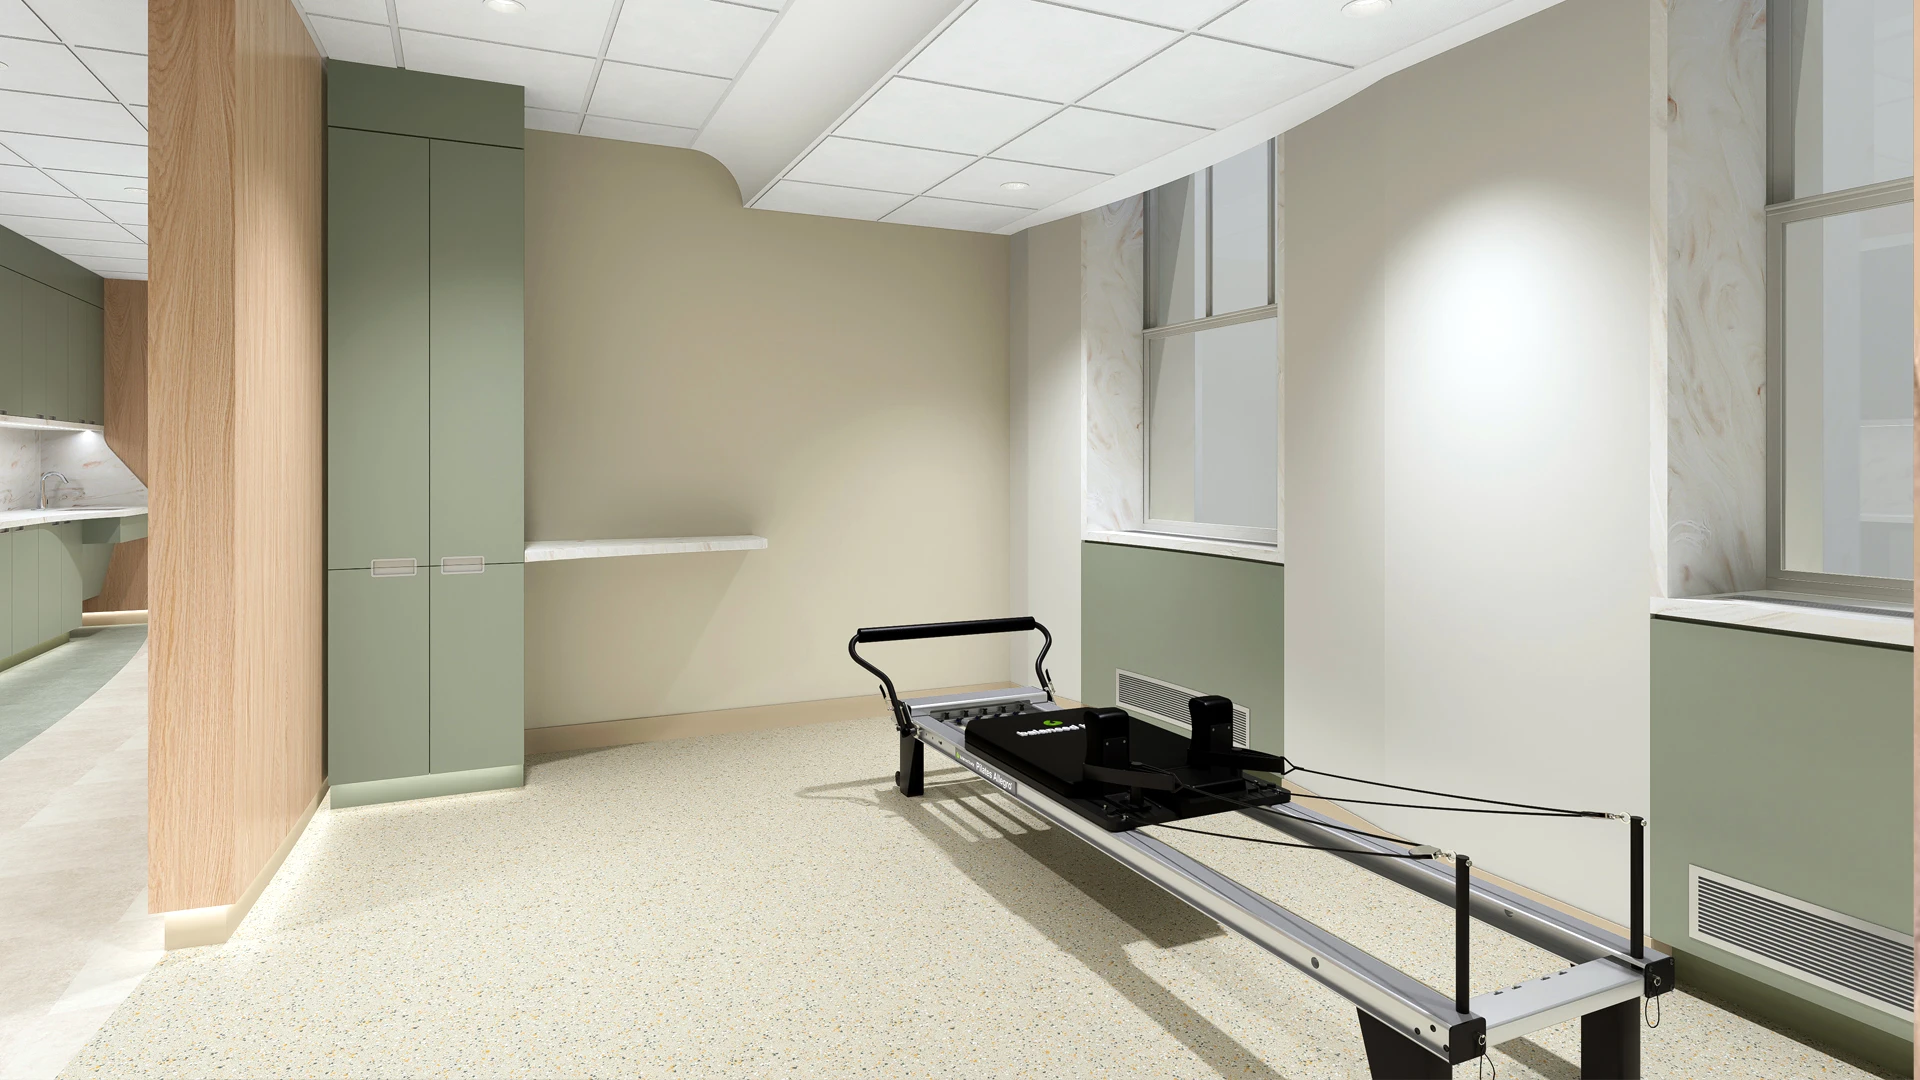 Lighting is an important element of CoRE, such as in the Pilates room, where soft sources of natural light are balanced with integrated lighting in the millwork to create a welcoming feel.